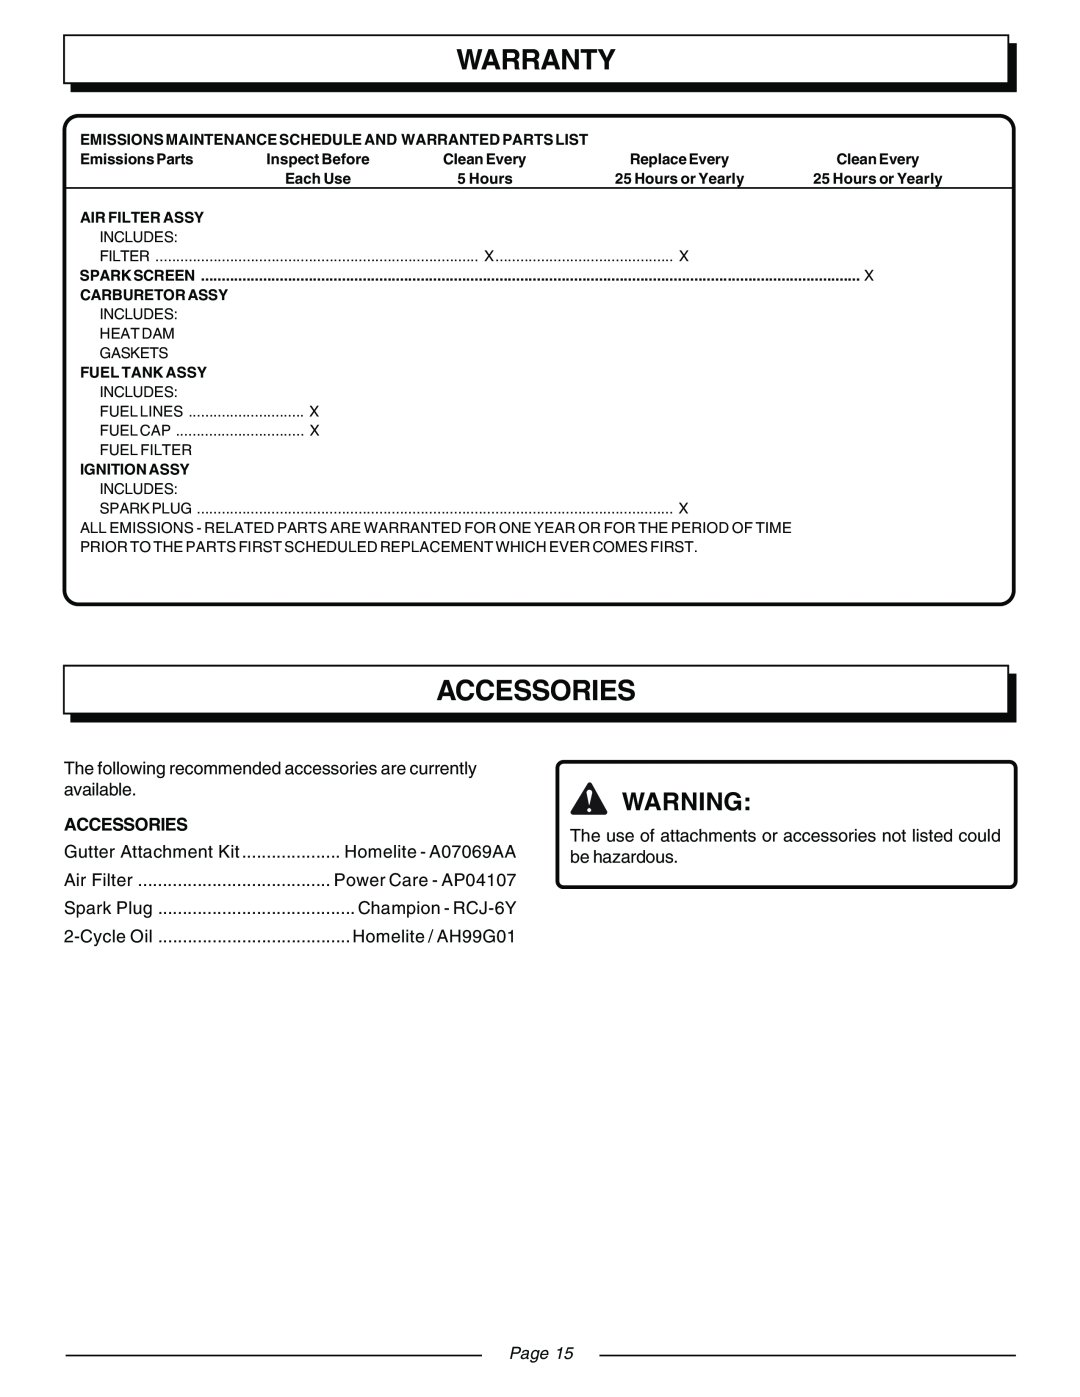 Homelite ZR08110 Accessories, Warranty, Page, Homelite - A07069AA, Emissions Maintenance Schedule And Warranted Parts List 